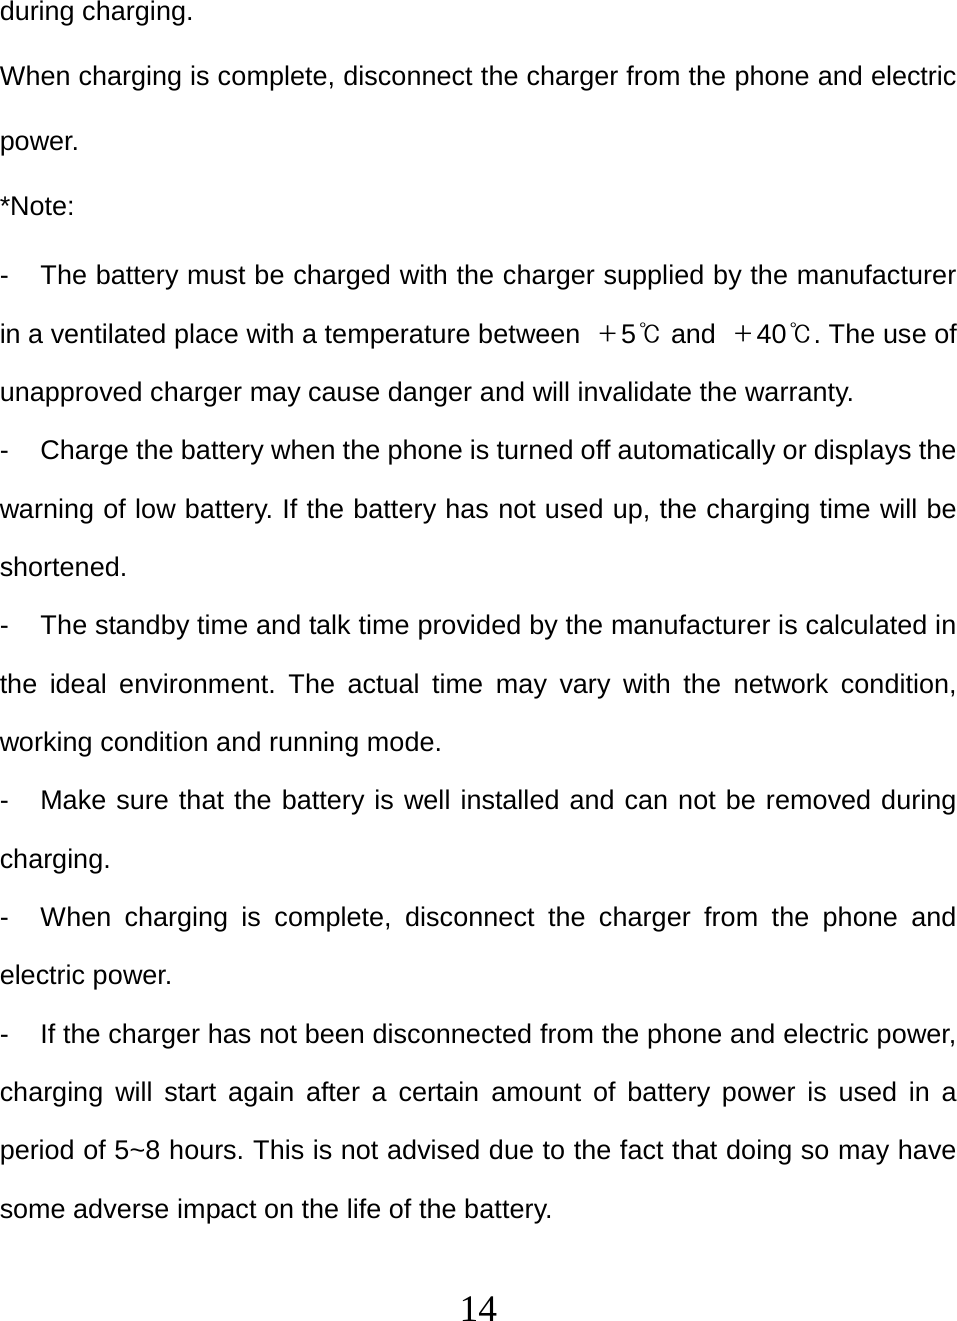   14during charging. When charging is complete, disconnect the charger from the phone and electric power. *Note: -  The battery must be charged with the charger supplied by the manufacturer in a ventilated place with a temperature between  ＋5℃ and  ＋40℃. The use of unapproved charger may cause danger and will invalidate the warranty. -  Charge the battery when the phone is turned off automatically or displays the warning of low battery. If the battery has not used up, the charging time will be shortened. -  The standby time and talk time provided by the manufacturer is calculated in the ideal environment. The actual time may vary with the network condition, working condition and running mode. -  Make sure that the battery is well installed and can not be removed during charging. -  When charging is complete, disconnect the charger from the phone and electric power. -  If the charger has not been disconnected from the phone and electric power, charging will start again after a certain amount of battery power is used in a period of 5~8 hours. This is not advised due to the fact that doing so may have some adverse impact on the life of the battery. 